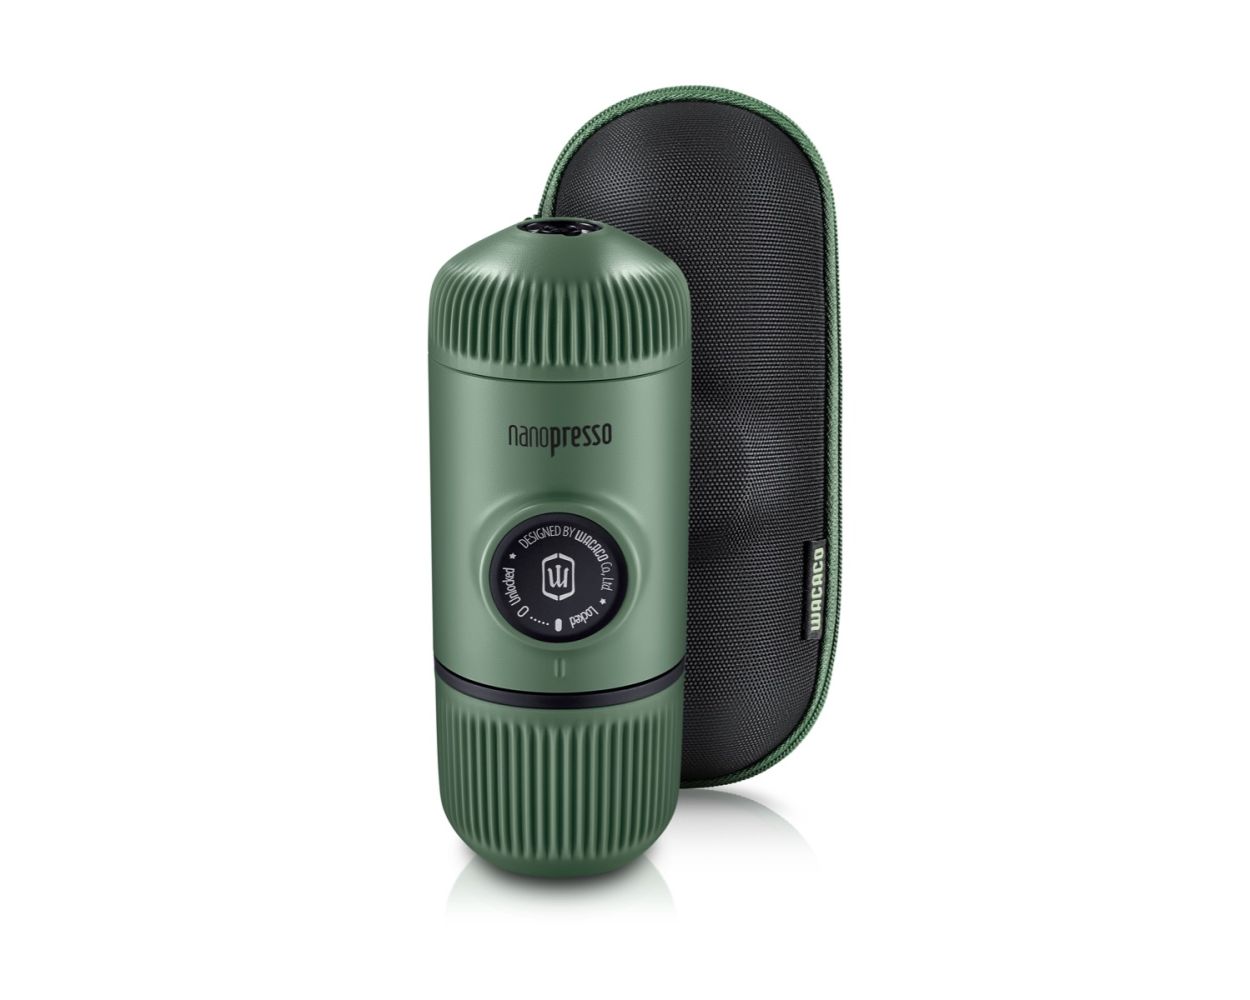 Wacaco Nanopresso + Case "be your own barista" Green  inklusive 250g Kaffee